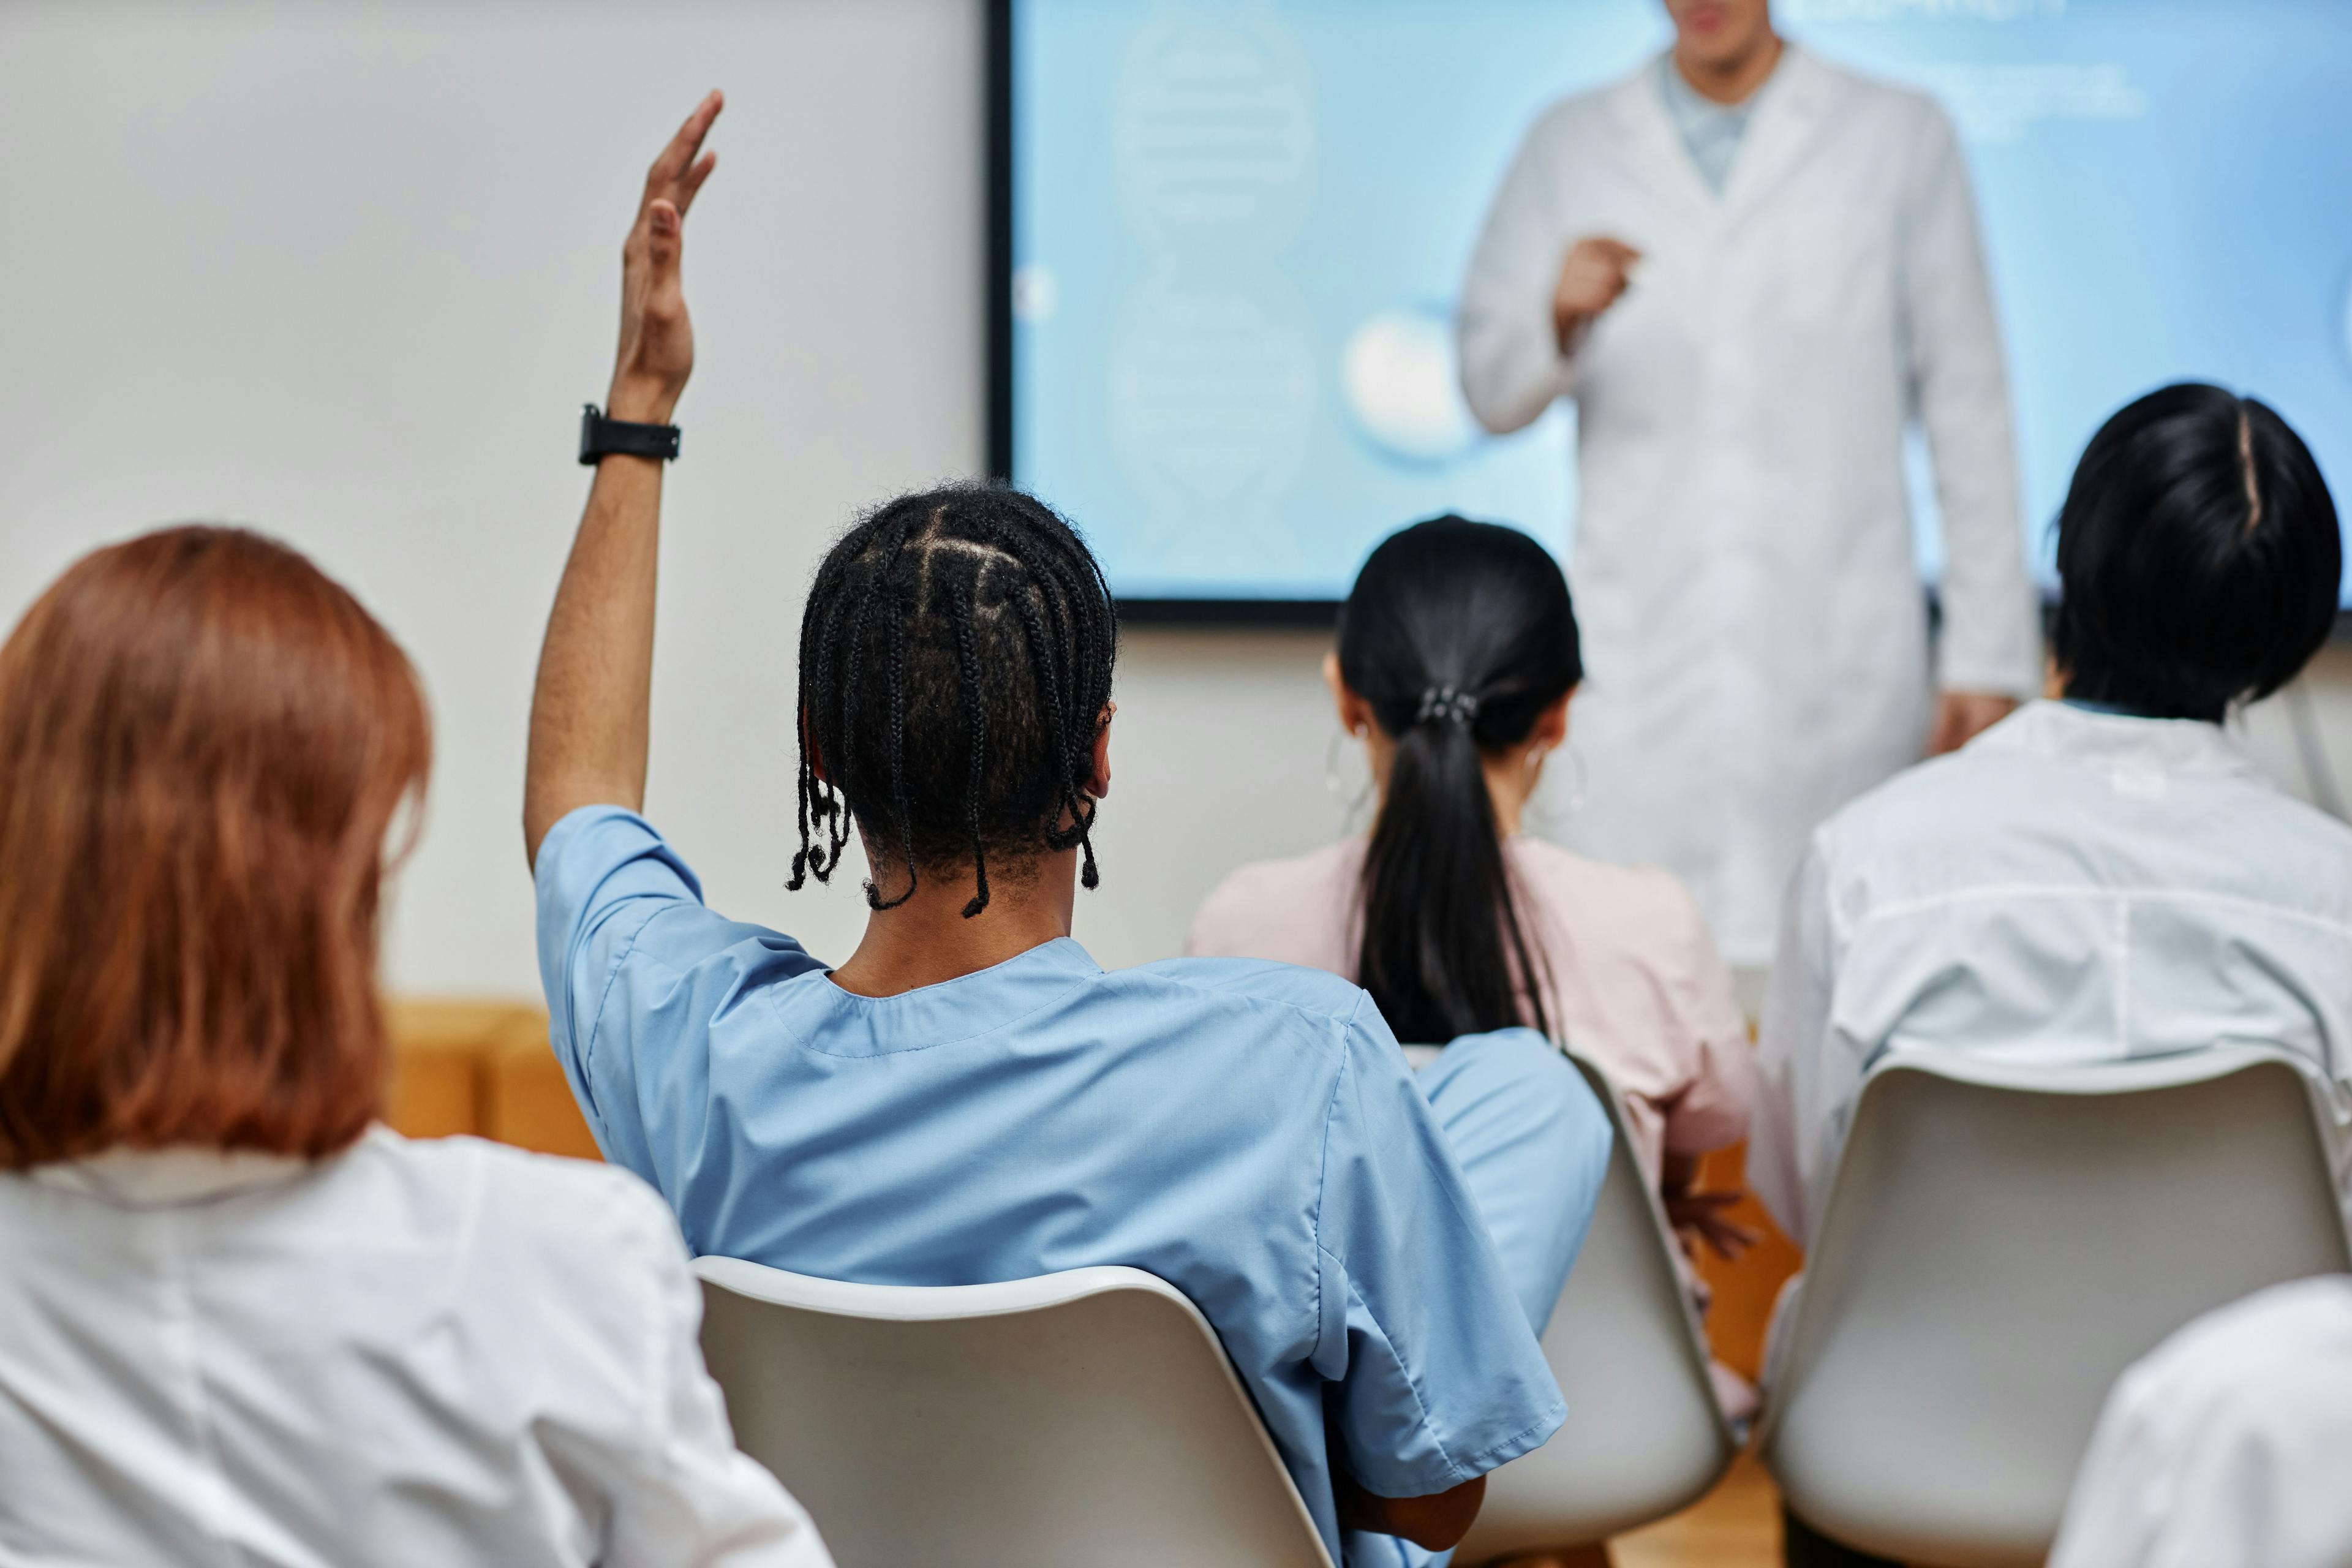 PrEP Training During Residency Increased Knowledge of HIV